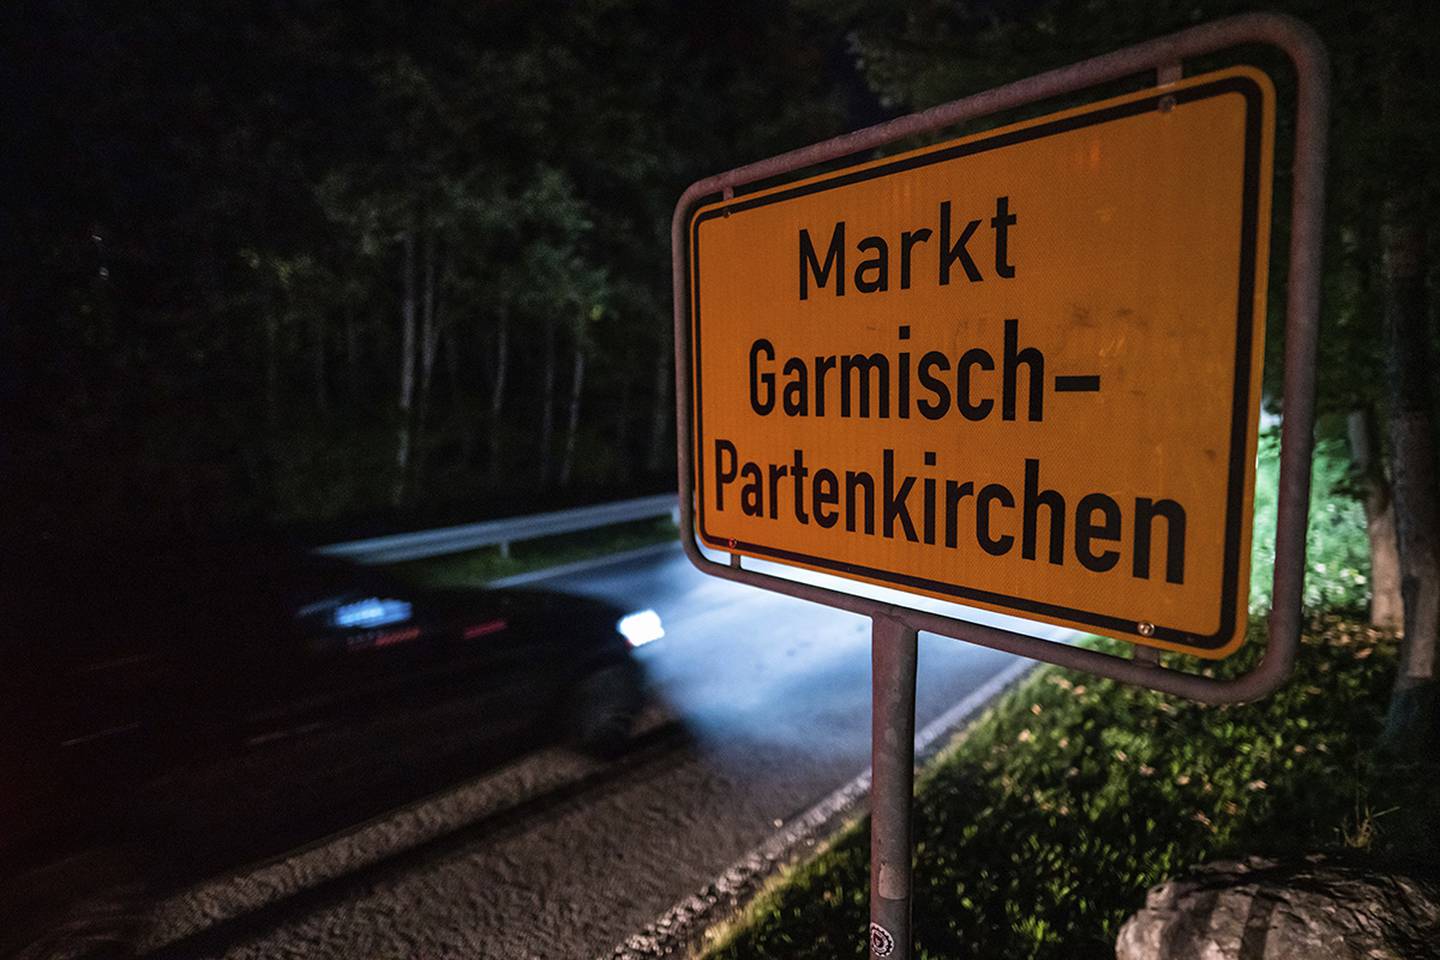 In this Sept. 13, 2020 taken photo a car drives past the place name sign in Garmisch-Partenkirchen, Germany.